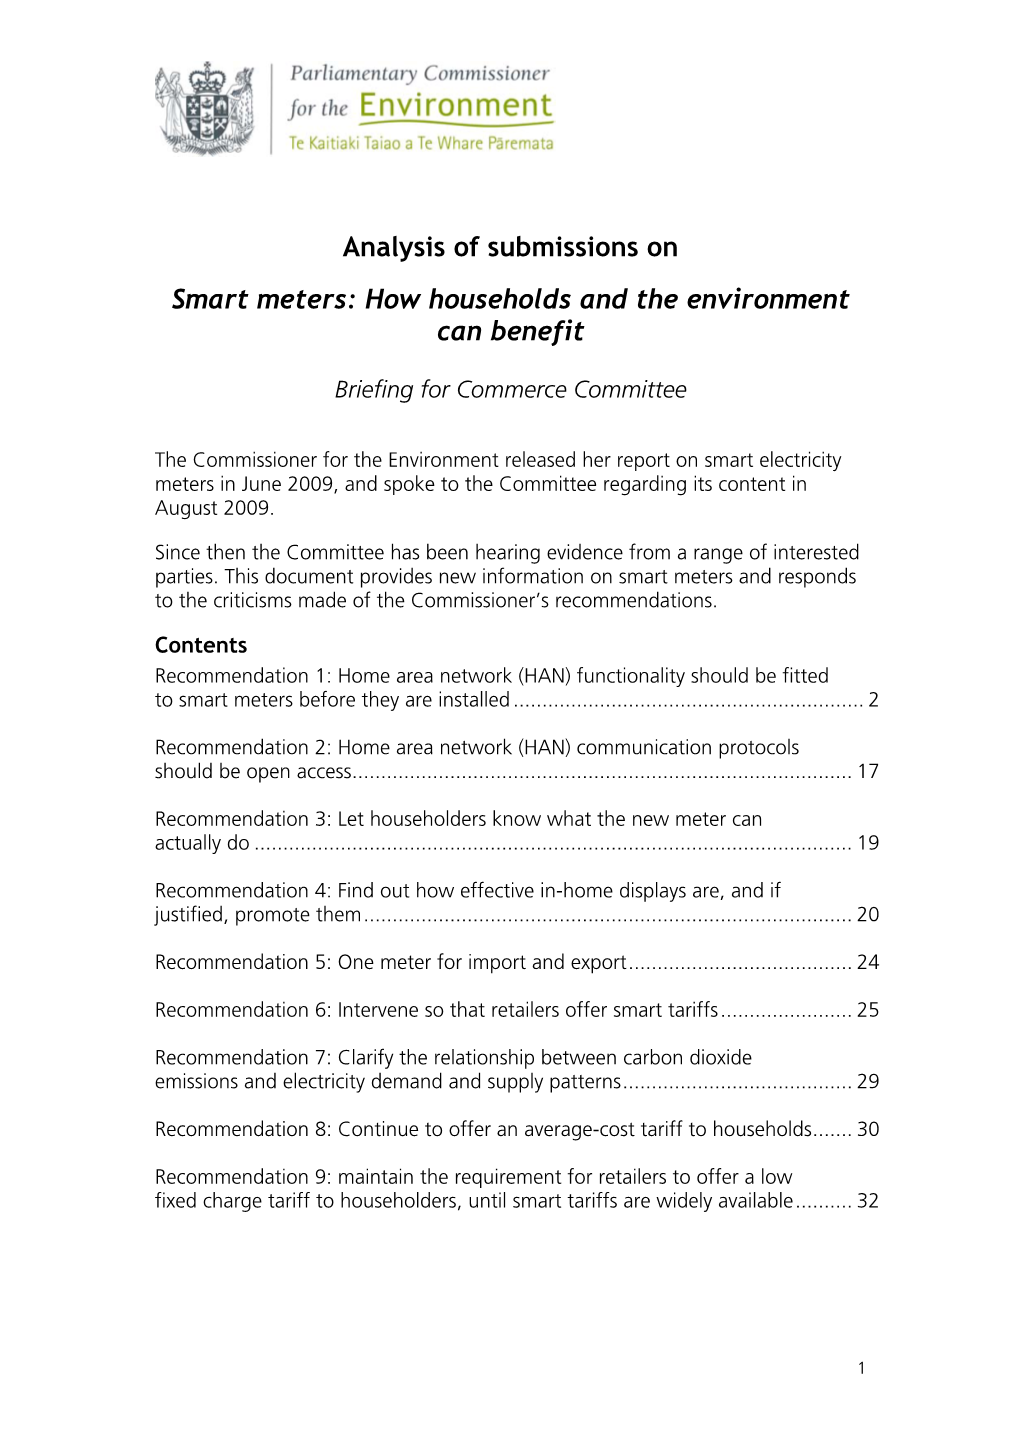 Analysis of Submissions on Smart Meters: How Households and the Environment Can Benefit